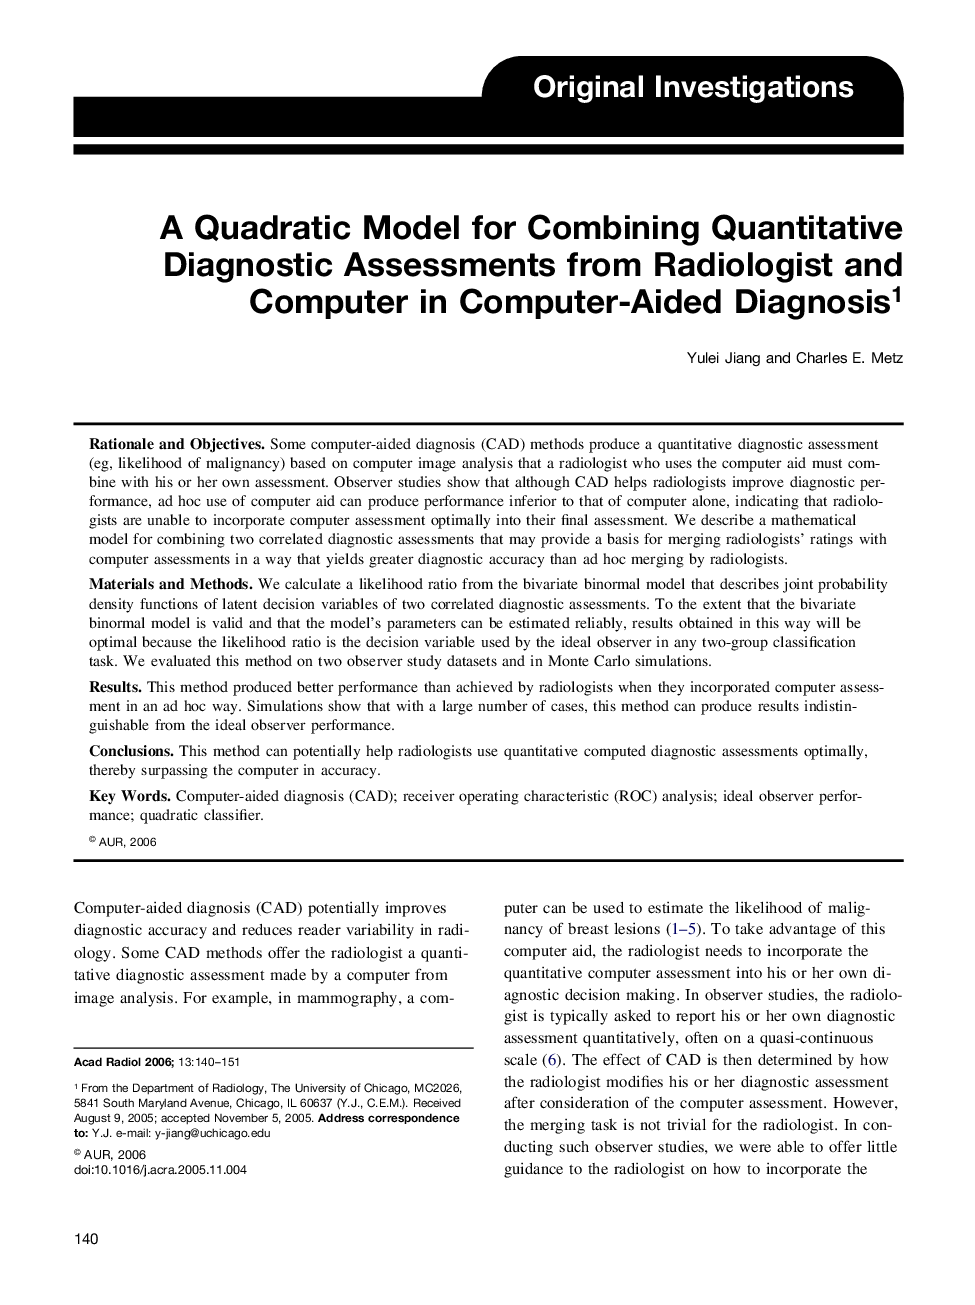 A Quadratic Model for Combining Quantitative Diagnostic Assessments from Radiologist and Computer in Computer-Aided Diagnosis